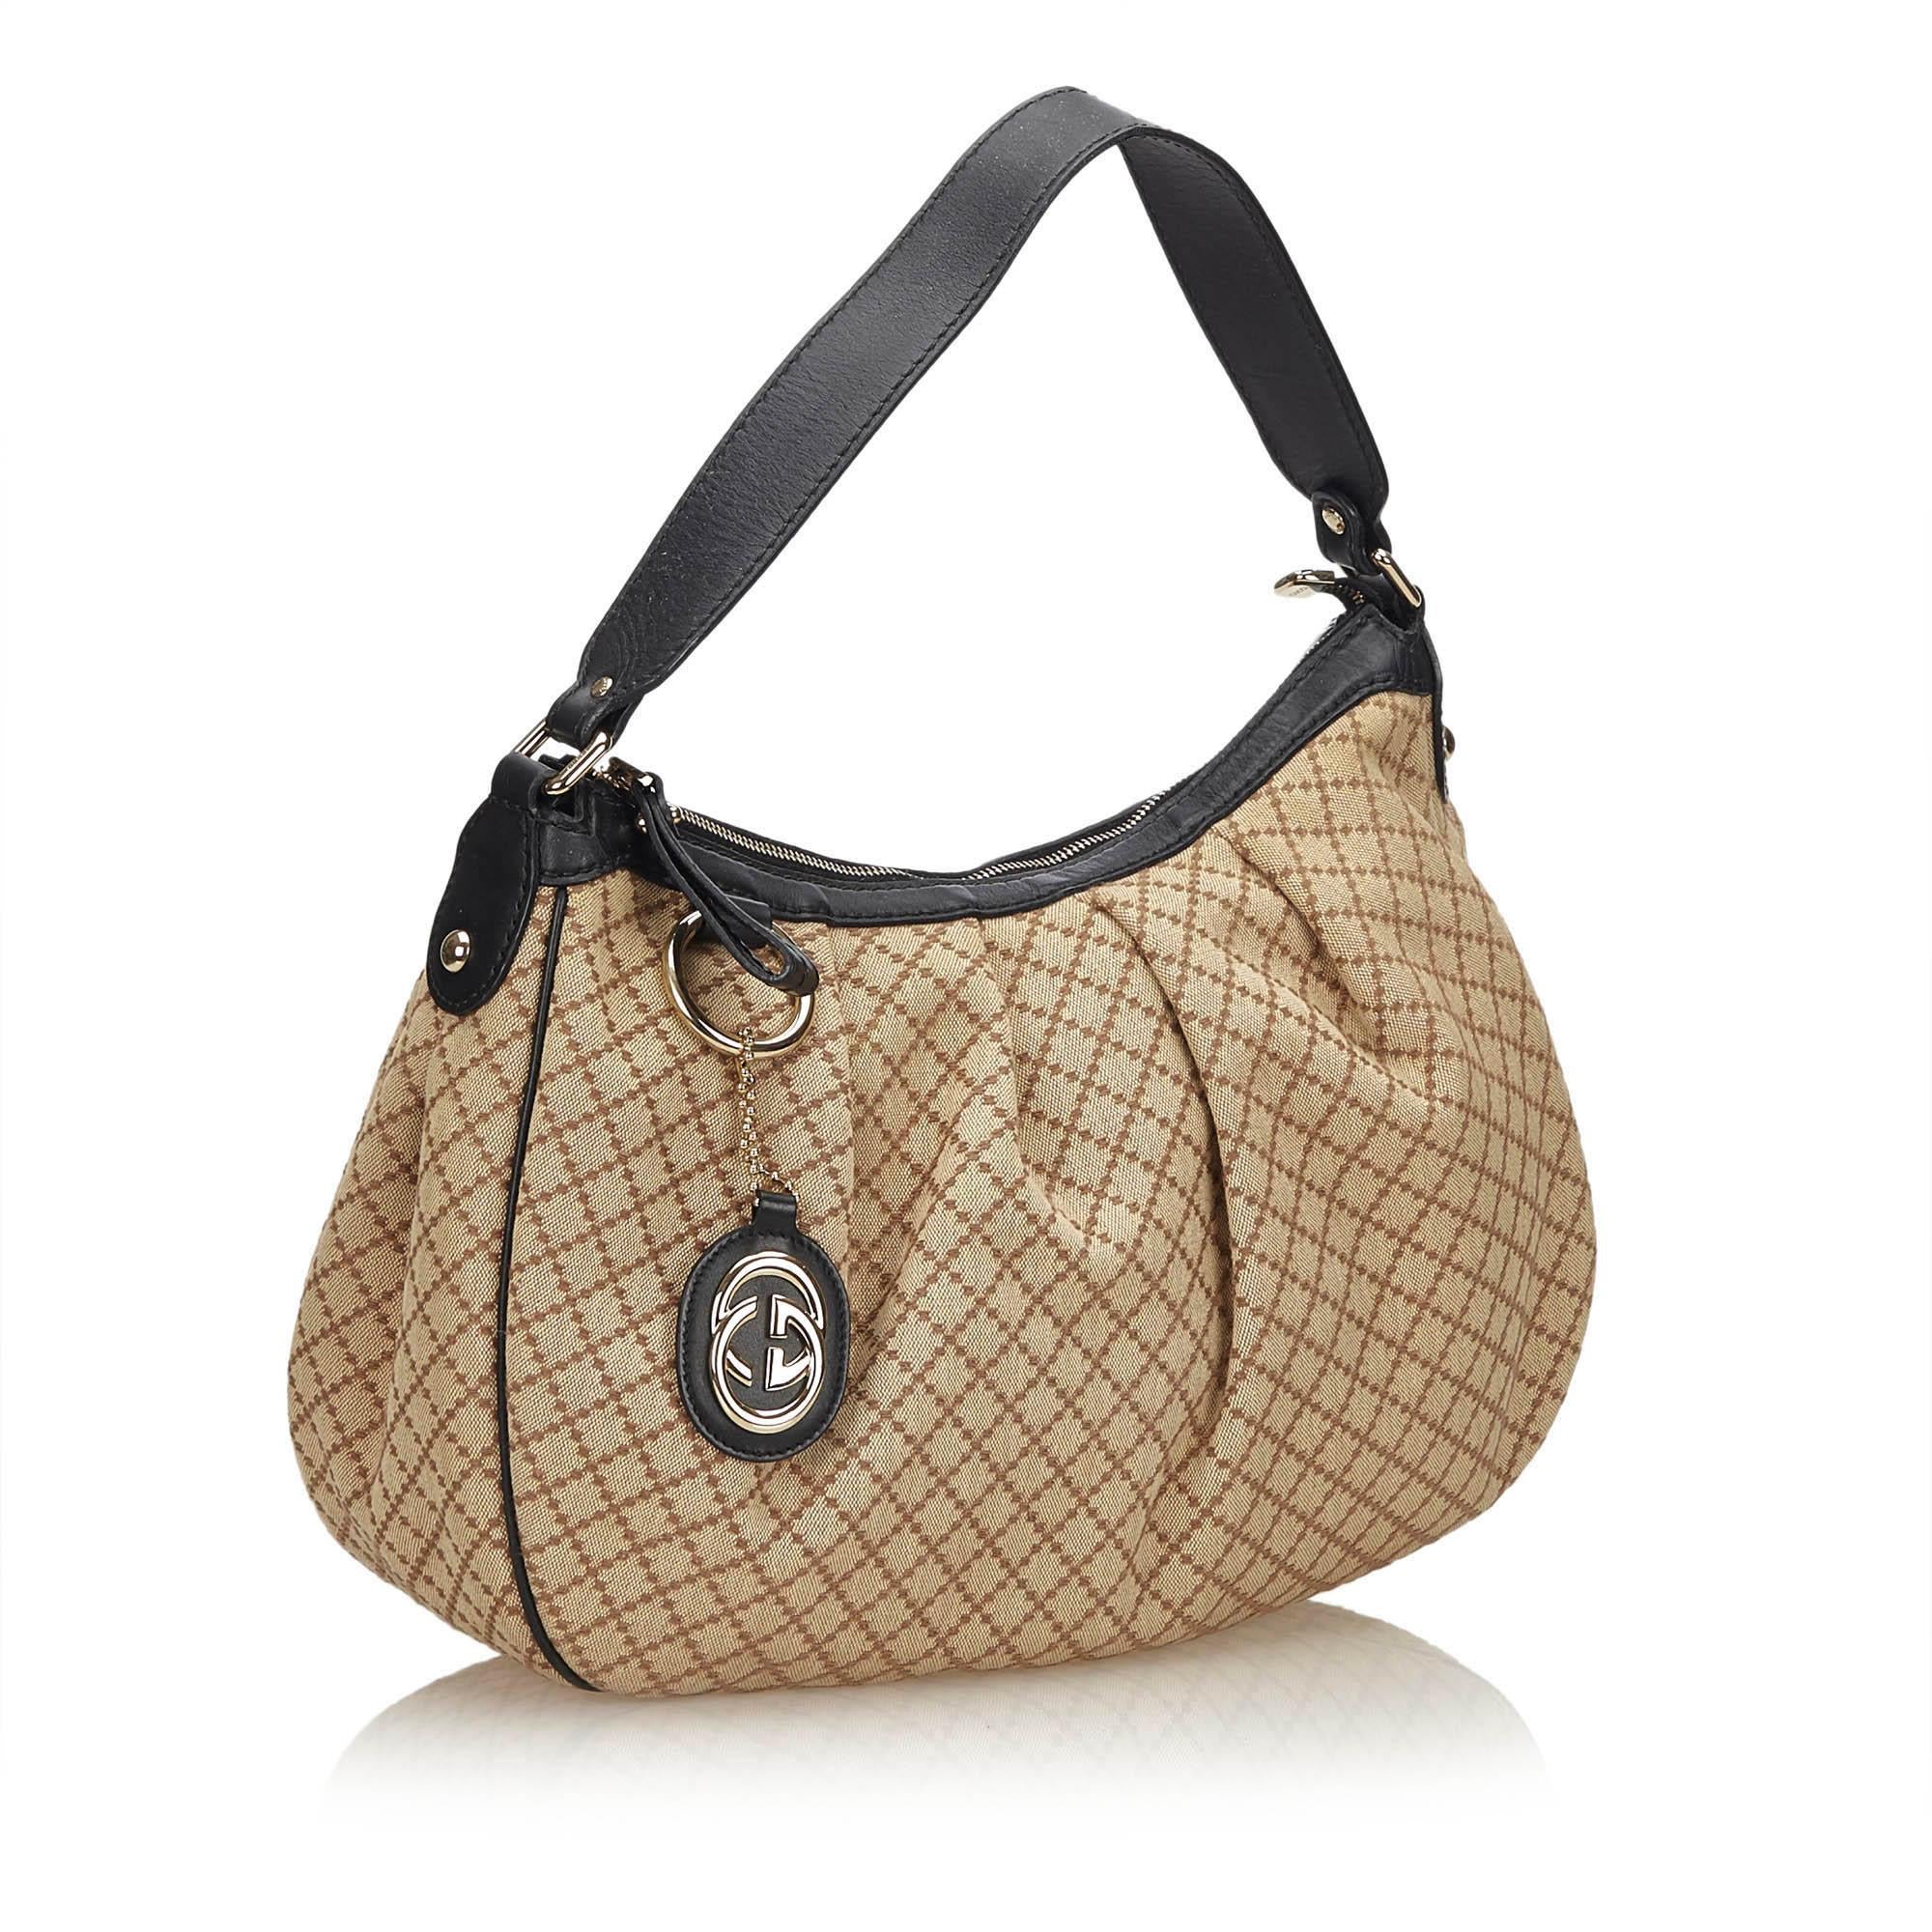 This Sukey features a canvas body, flat leather strap, top zip closure and interior zip and slip pockets.

It carries a B+ condition rating.

Dimensions: 
Length 27 cm
Width 34 cm
Depth 11 cm
Shoulder Drop 17 

Inclusions: Charm

Color: Brown x